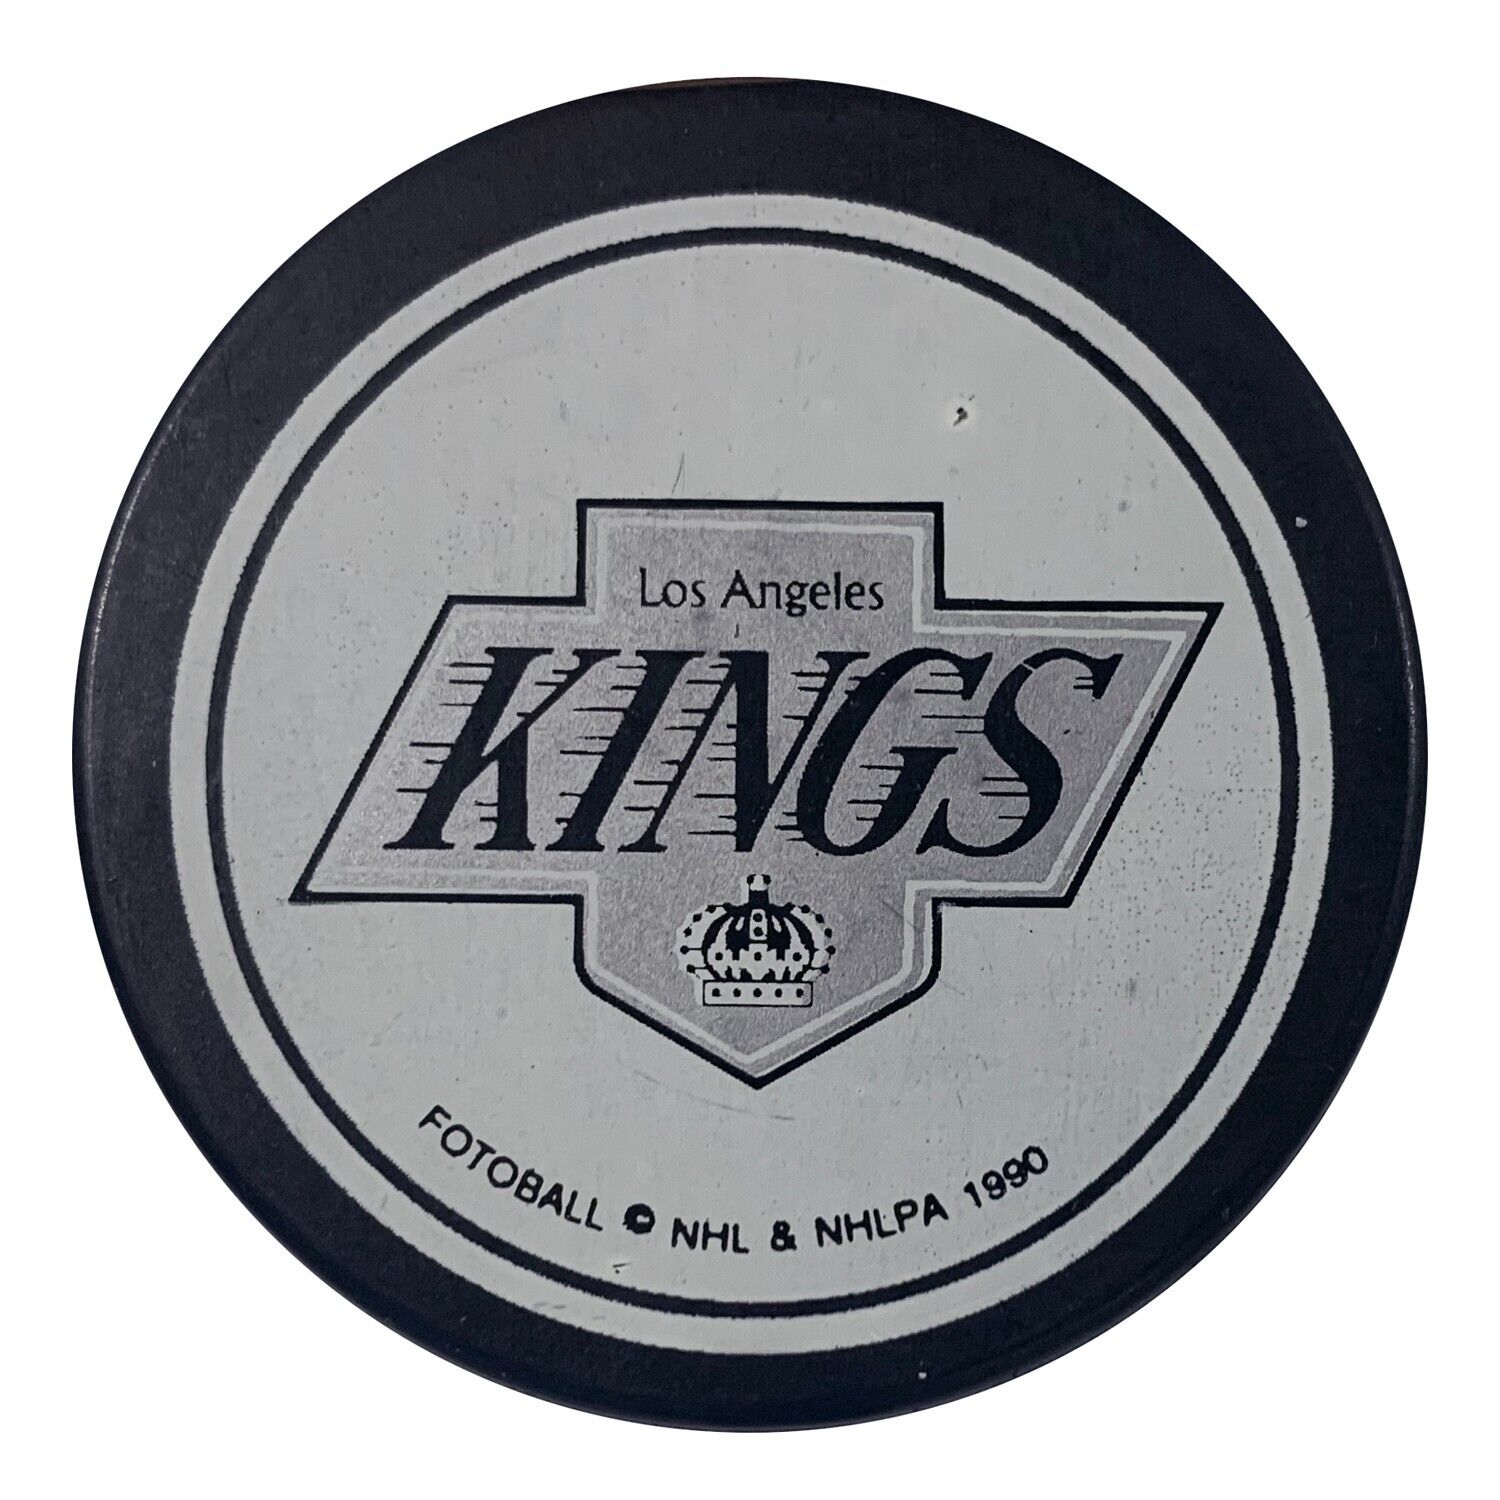 Wayne Gretzky Signed Puck, Limited Edition Scoring Record. Auto Beckett BAS